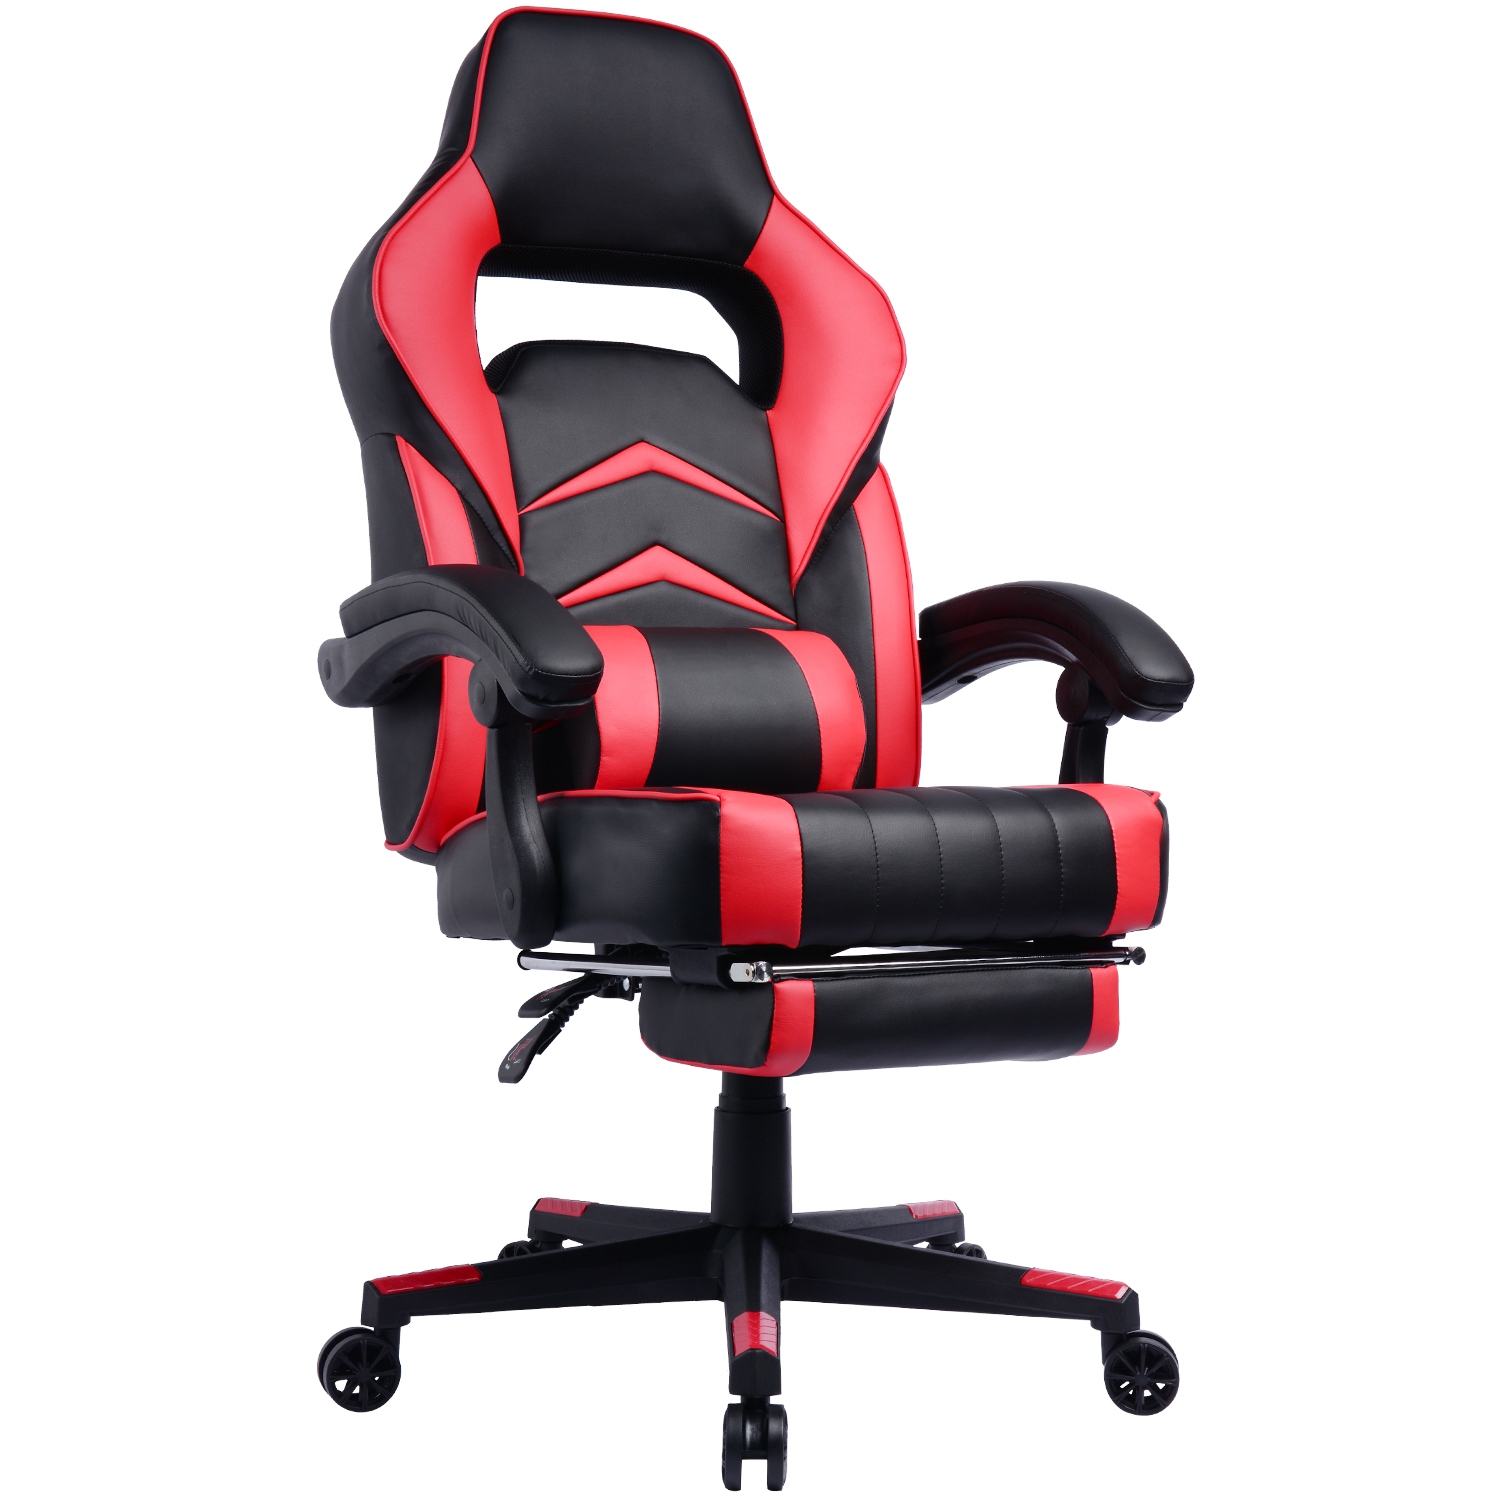 GamingChair Ergonomic PU Padded Leather Racing Gaming Chair with Extendable Footrest & Reclining Backrest (Red)